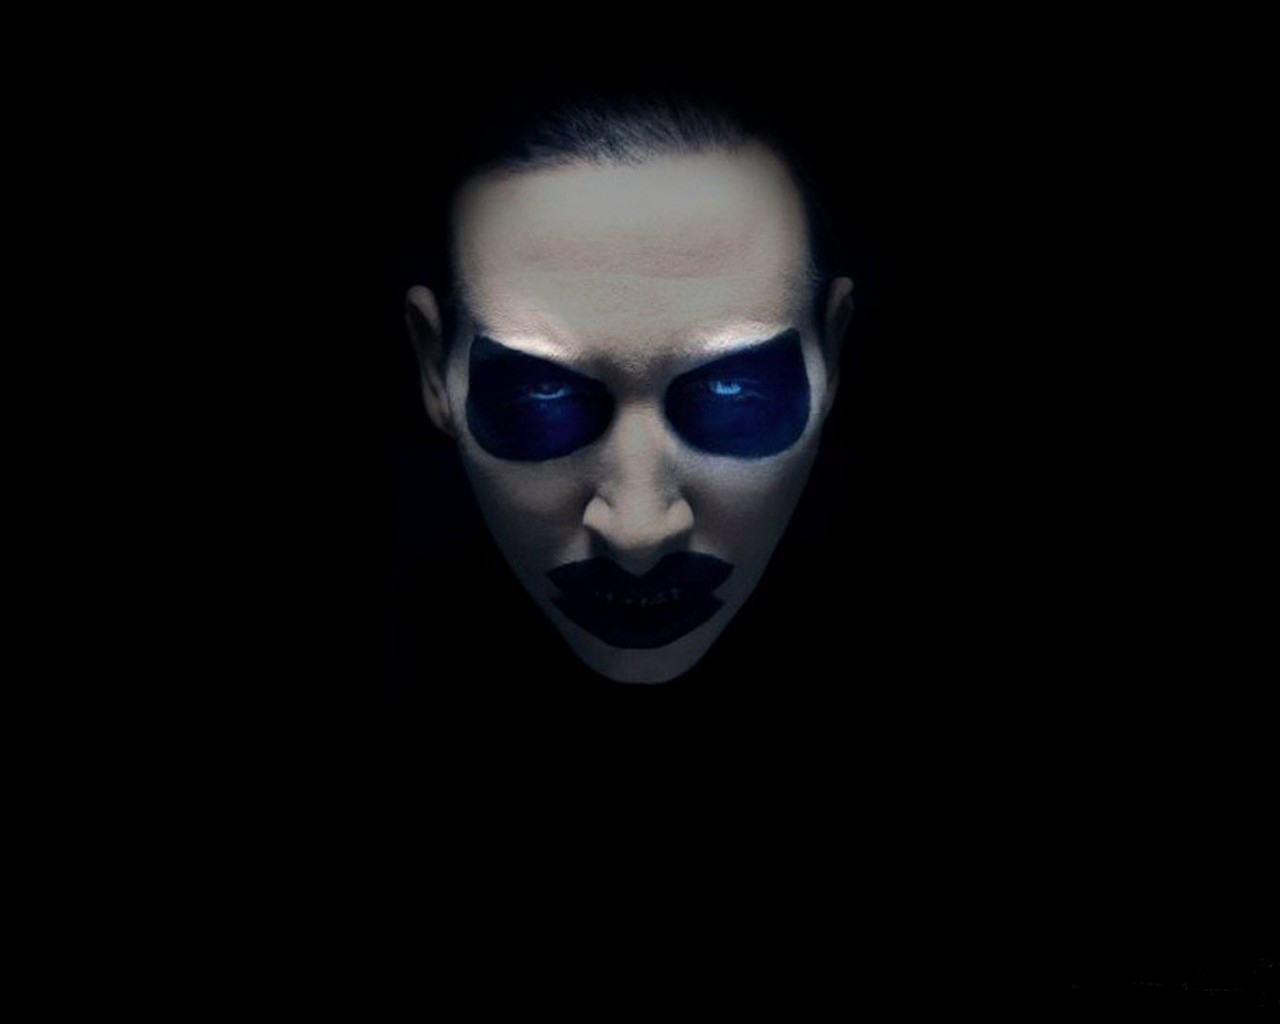 Marilyn Manson Wallpaper Image Photos Pictures Background